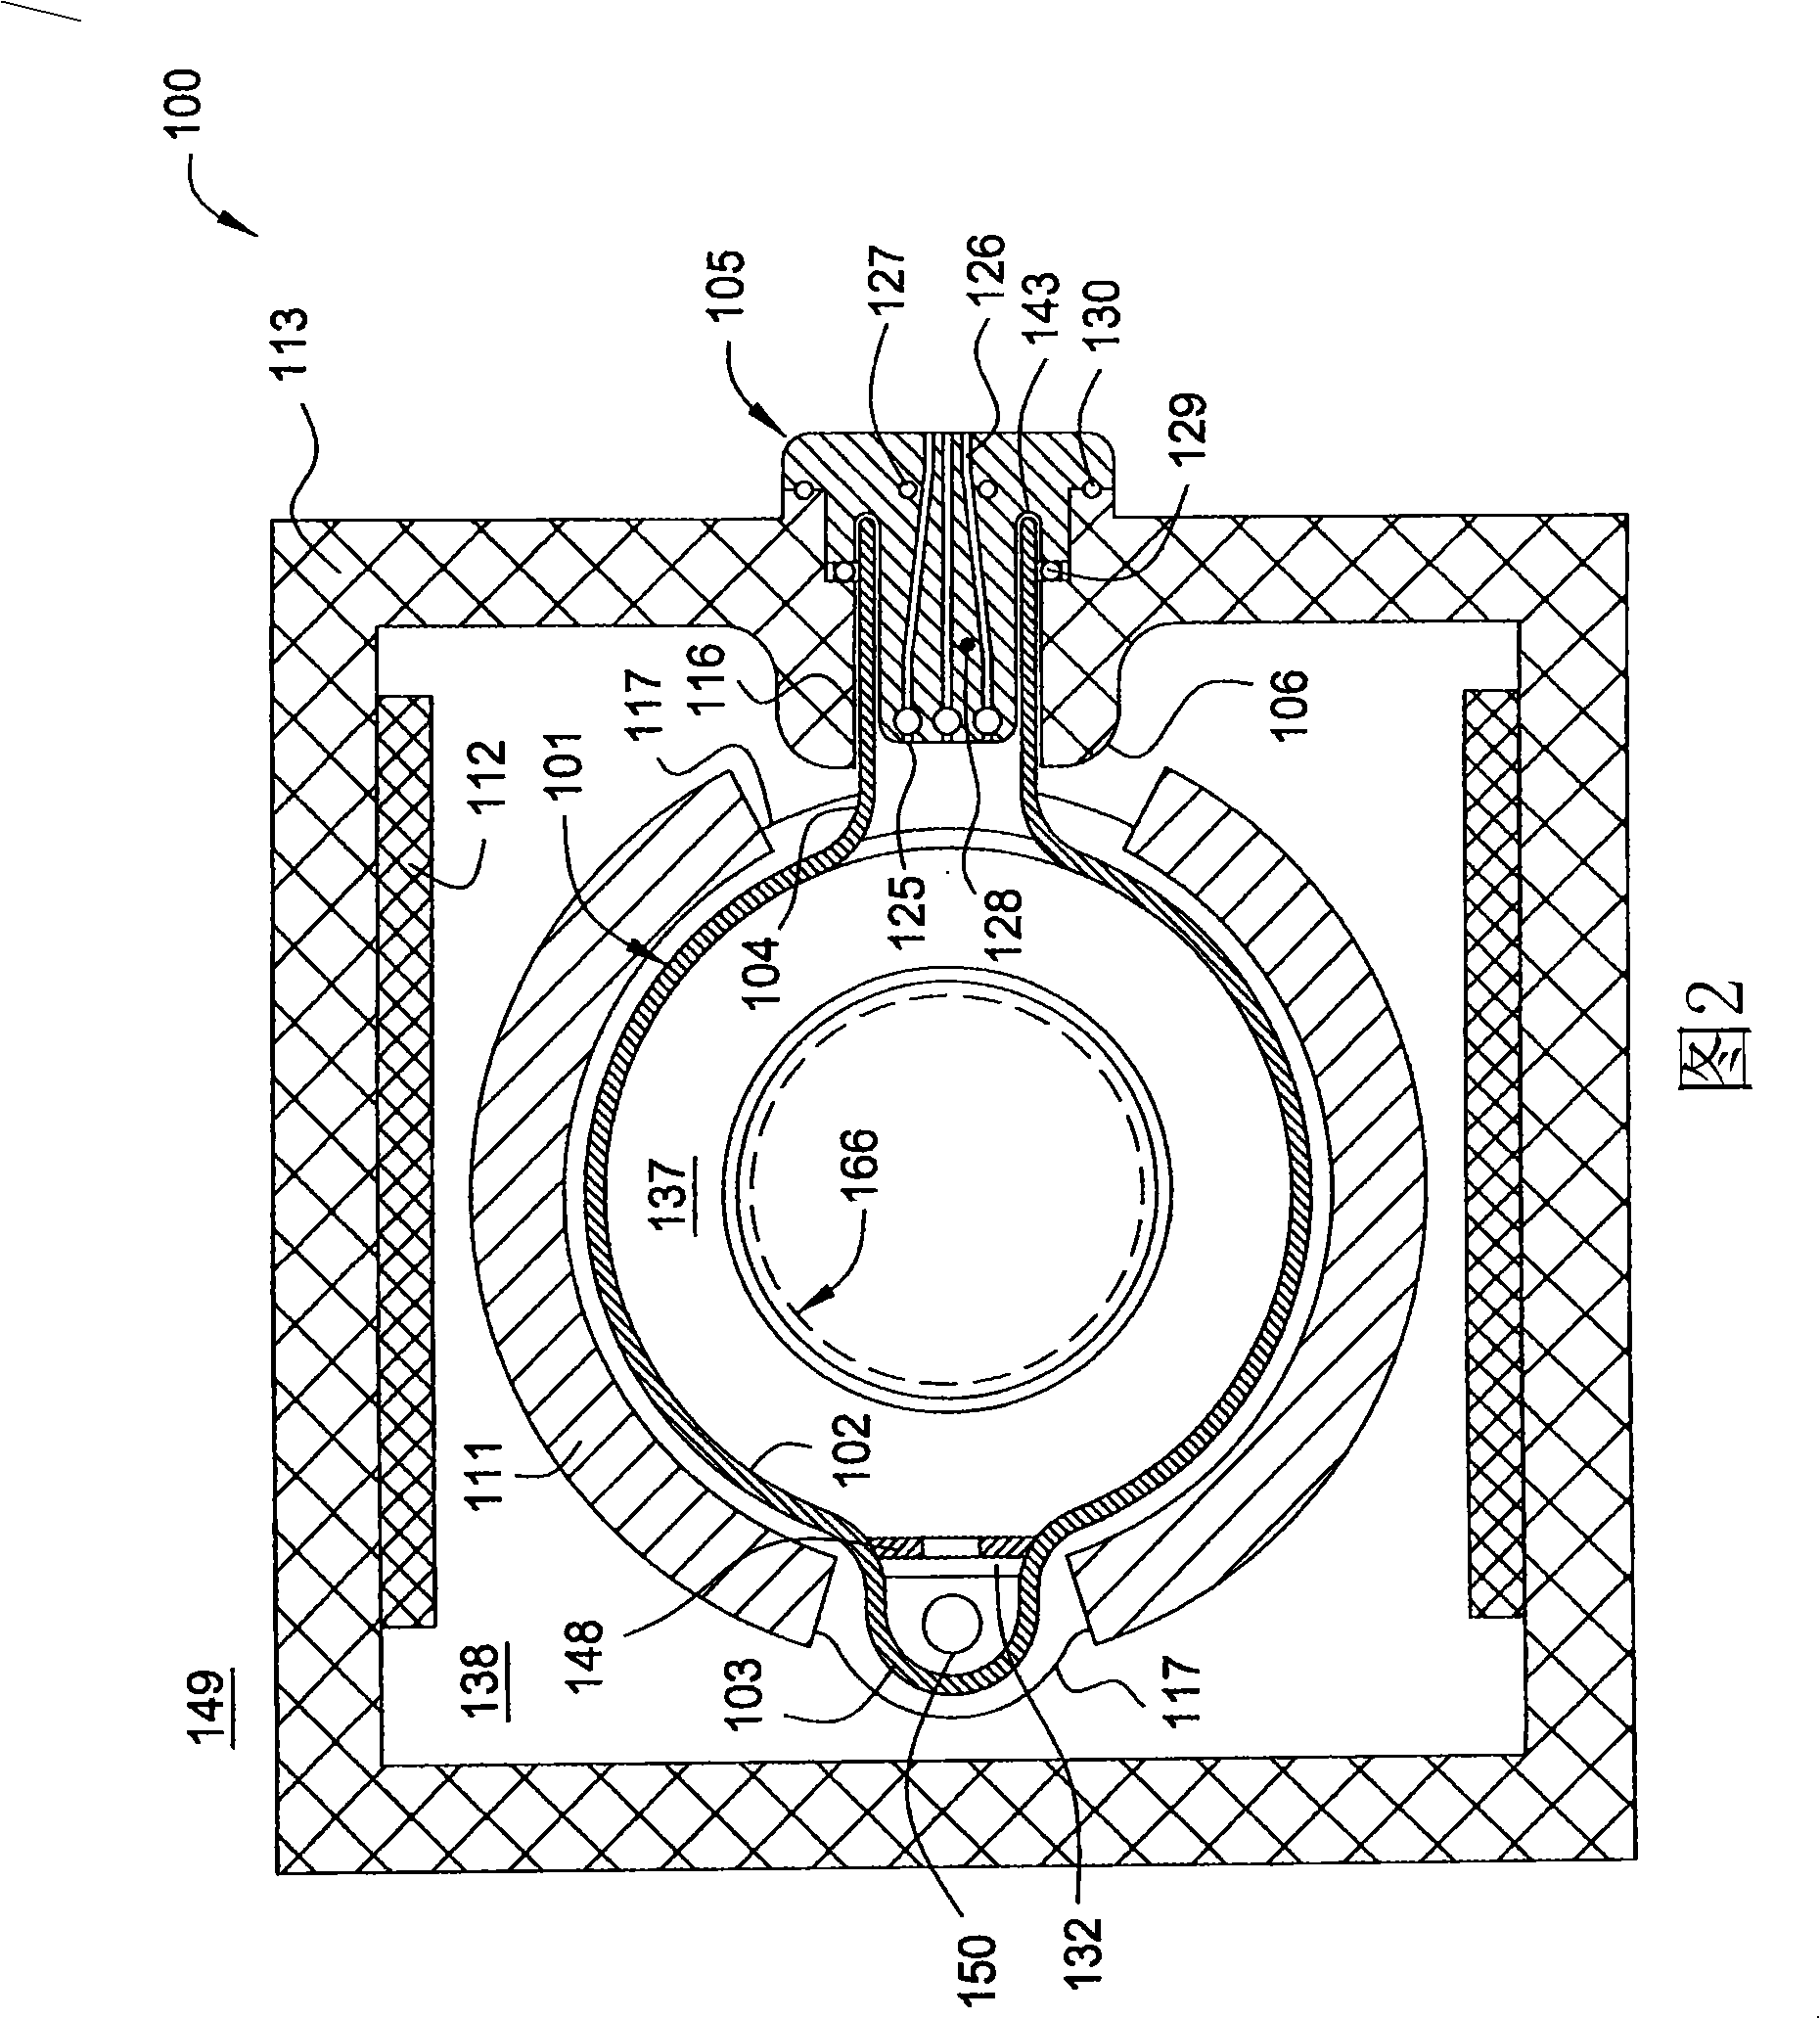 Thermal batch reactor with removable susceptors